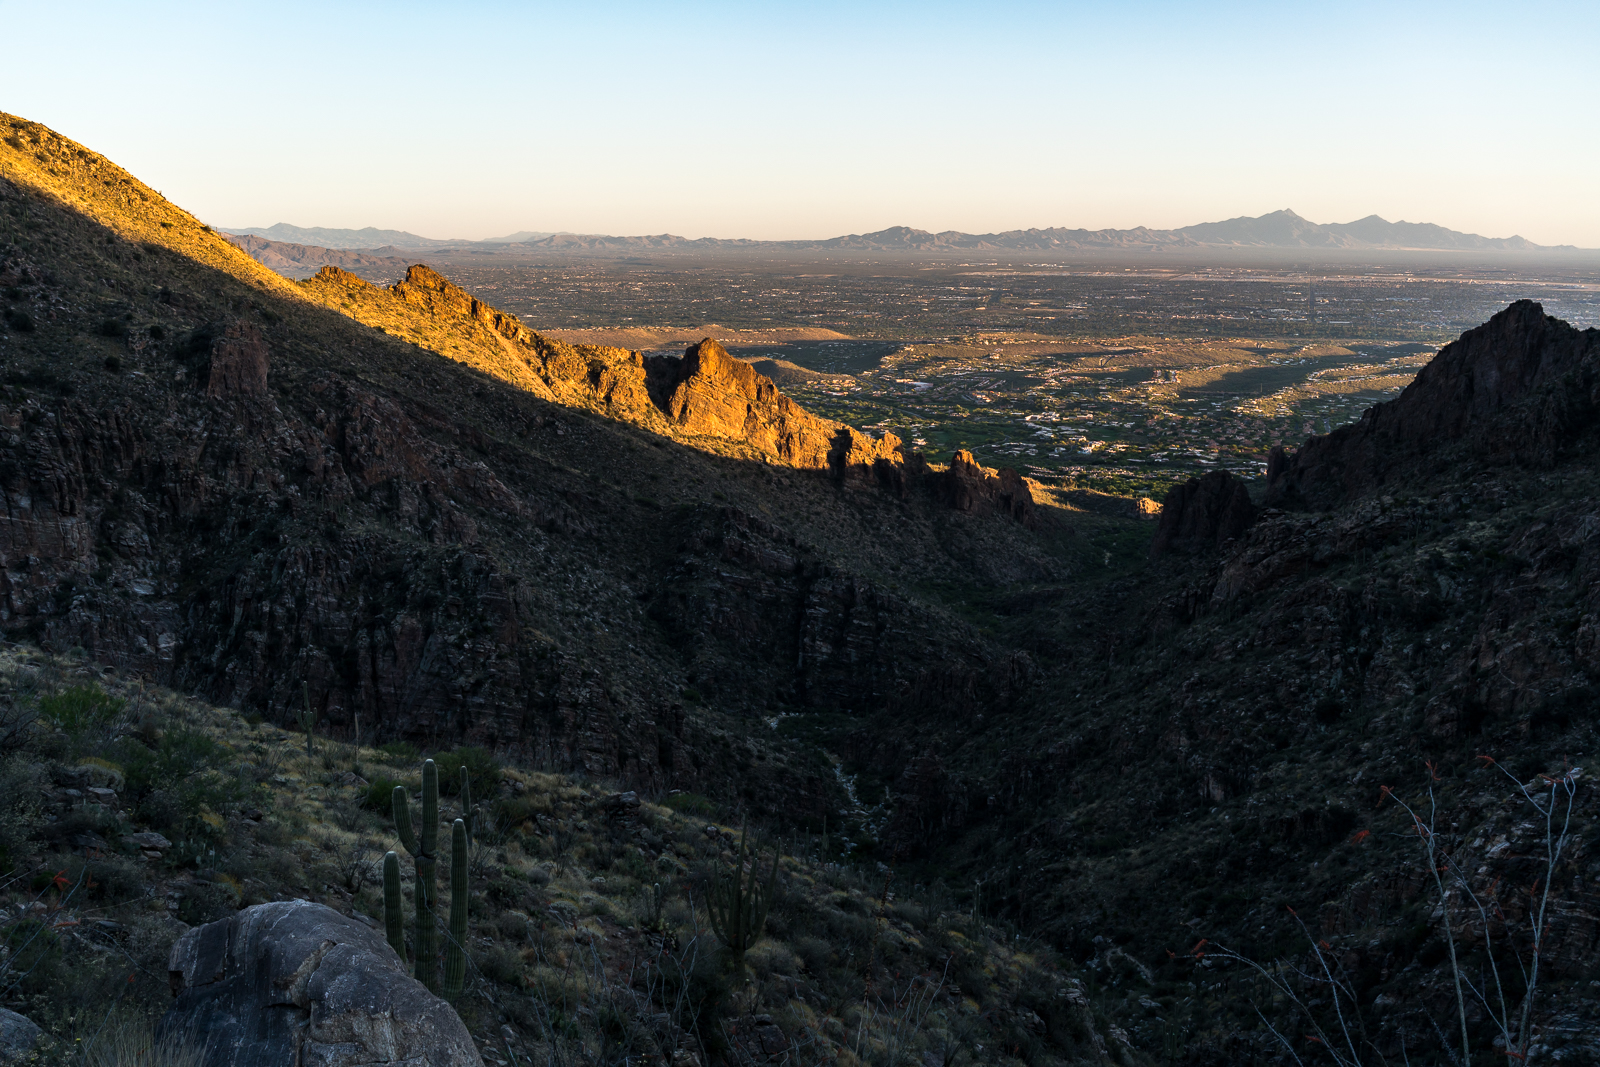 Ventana Canyon in Shadow, below Maiden pools just before sunset. March 2016.